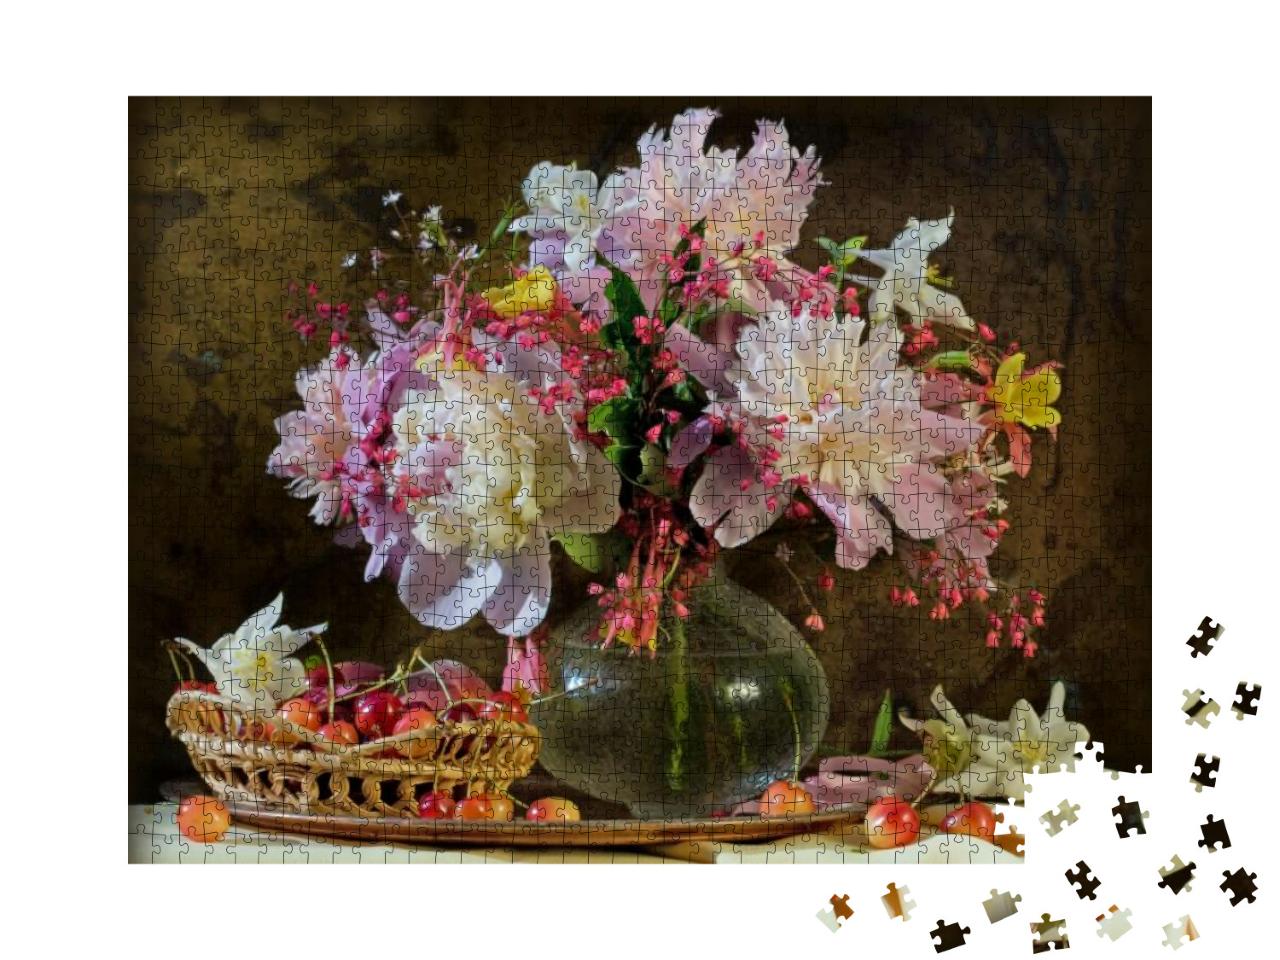 Still Life Bells, Peonies, Aquilegia... Jigsaw Puzzle with 1000 pieces